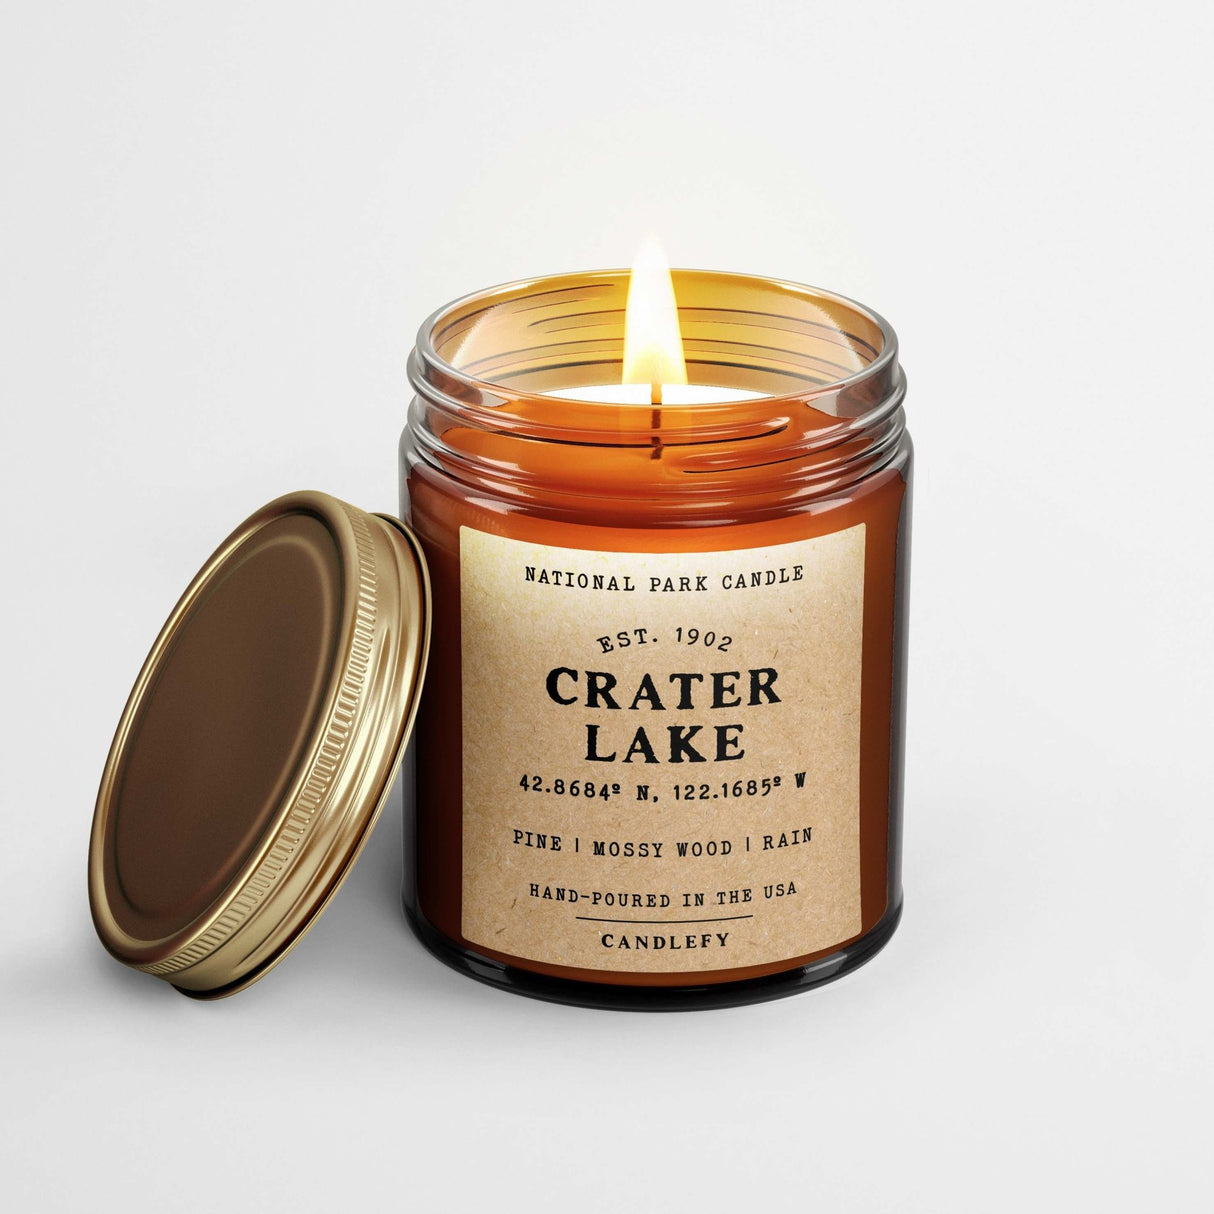 Crater Lake National Park Candle - Candlefy